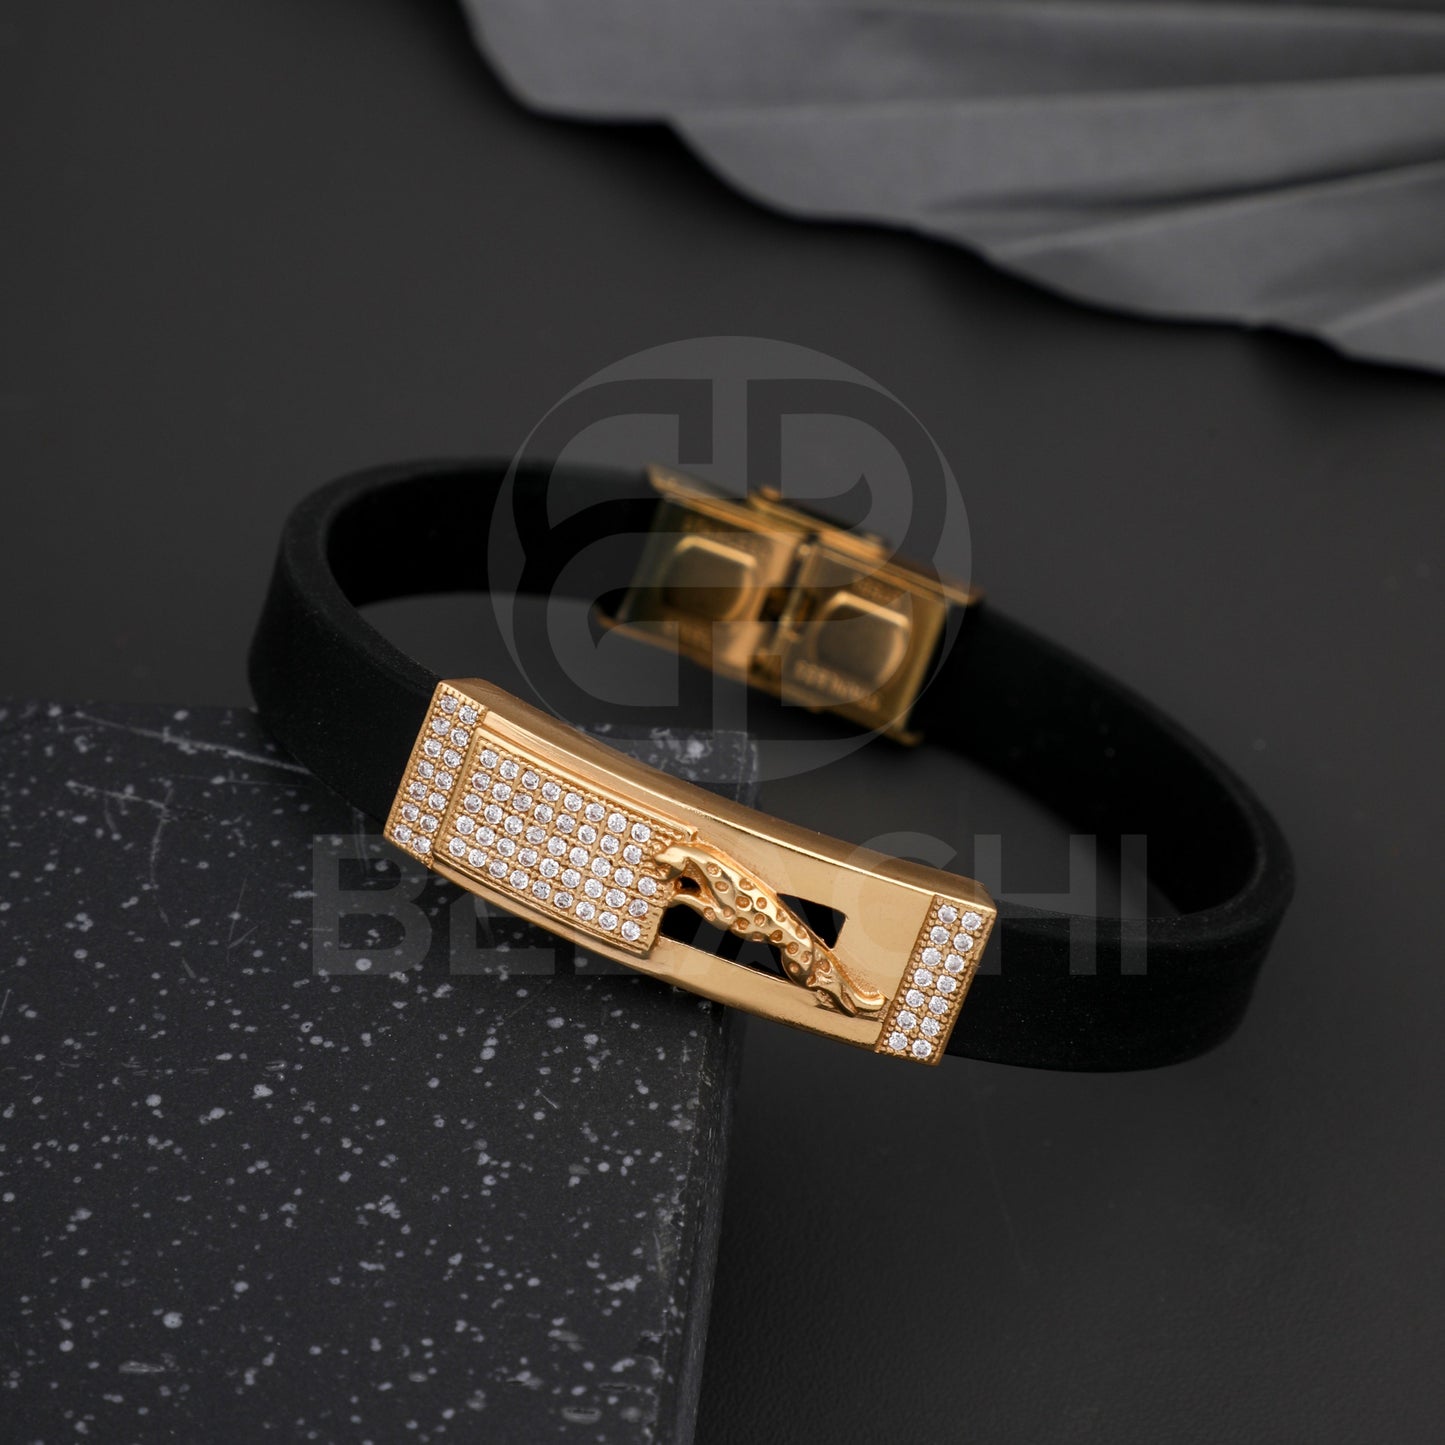 GOLD PLATED WILDCAT WITH DIAMOND IN BLACK SILICONE BRACELET